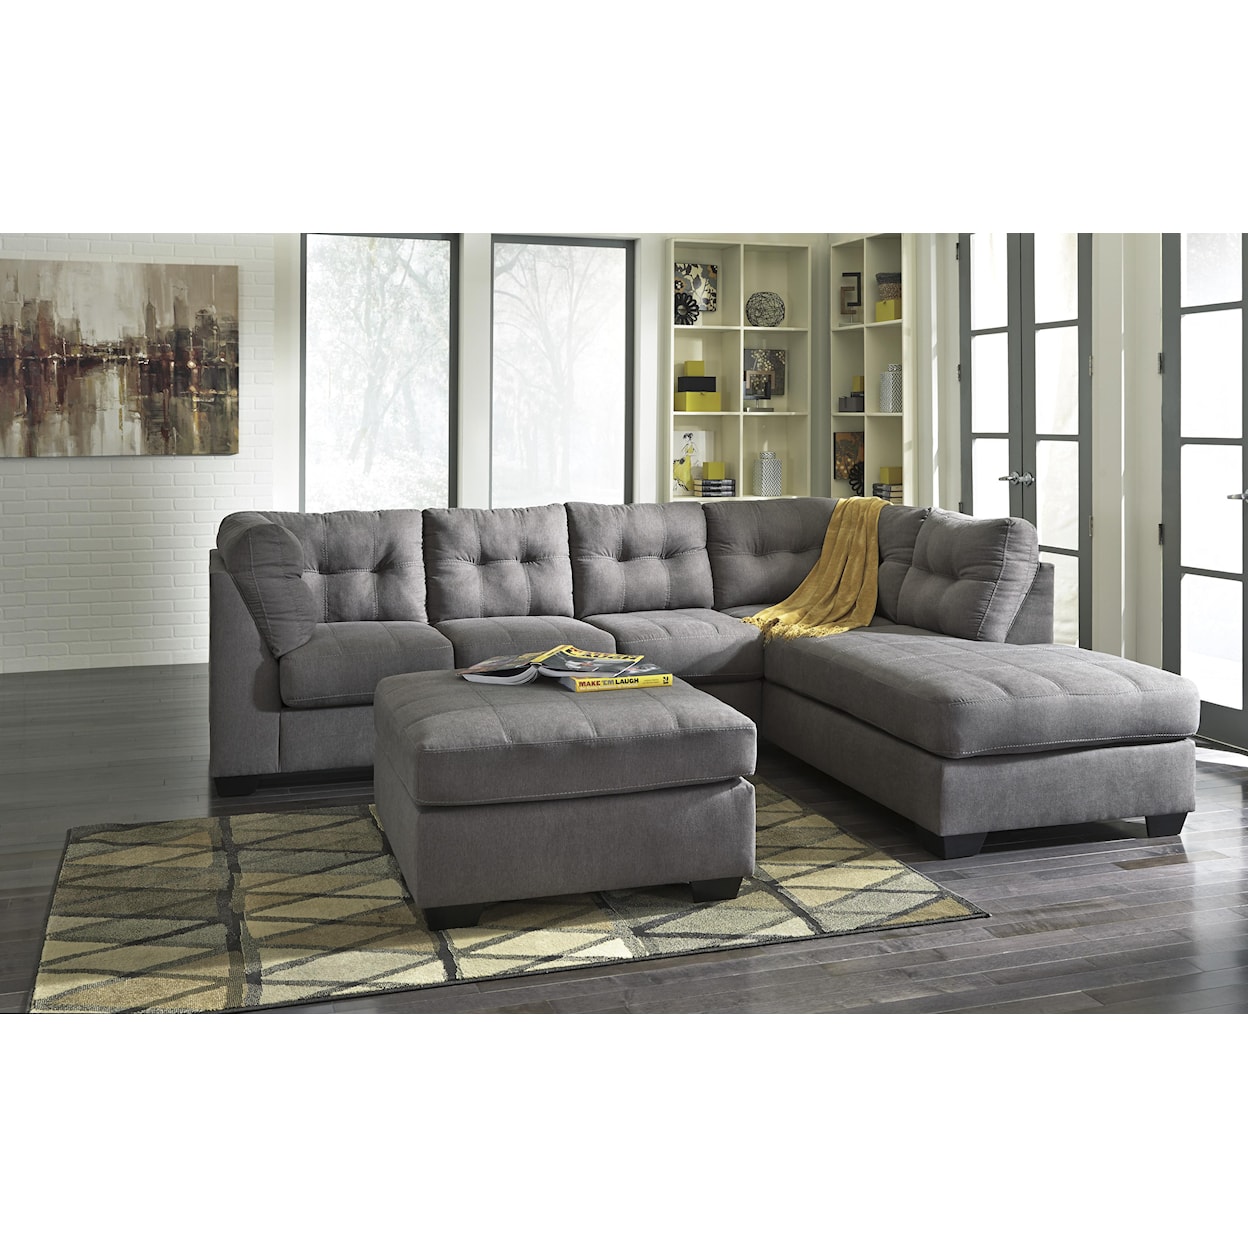 Benchcraft Maier - Charcoal 2-Piece Sectional with Right Chaise